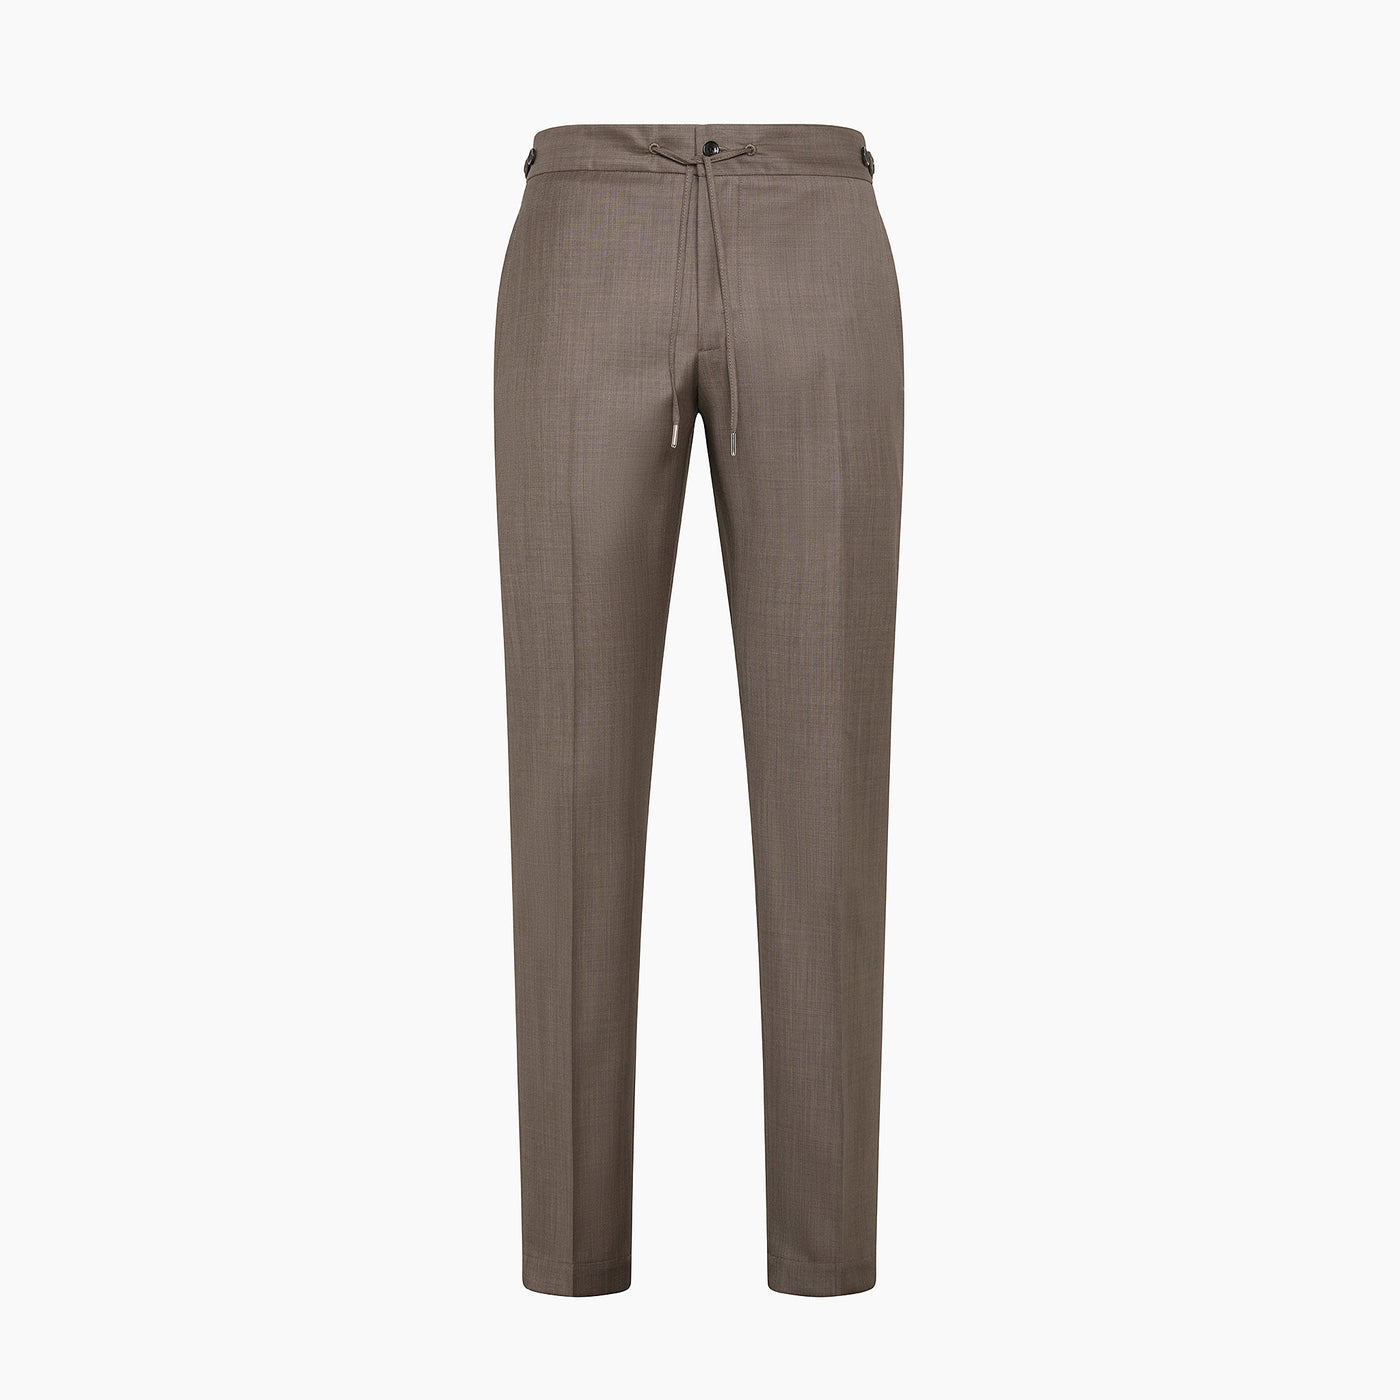 Vince easy pants with drawstring in Freemove 120's Wool